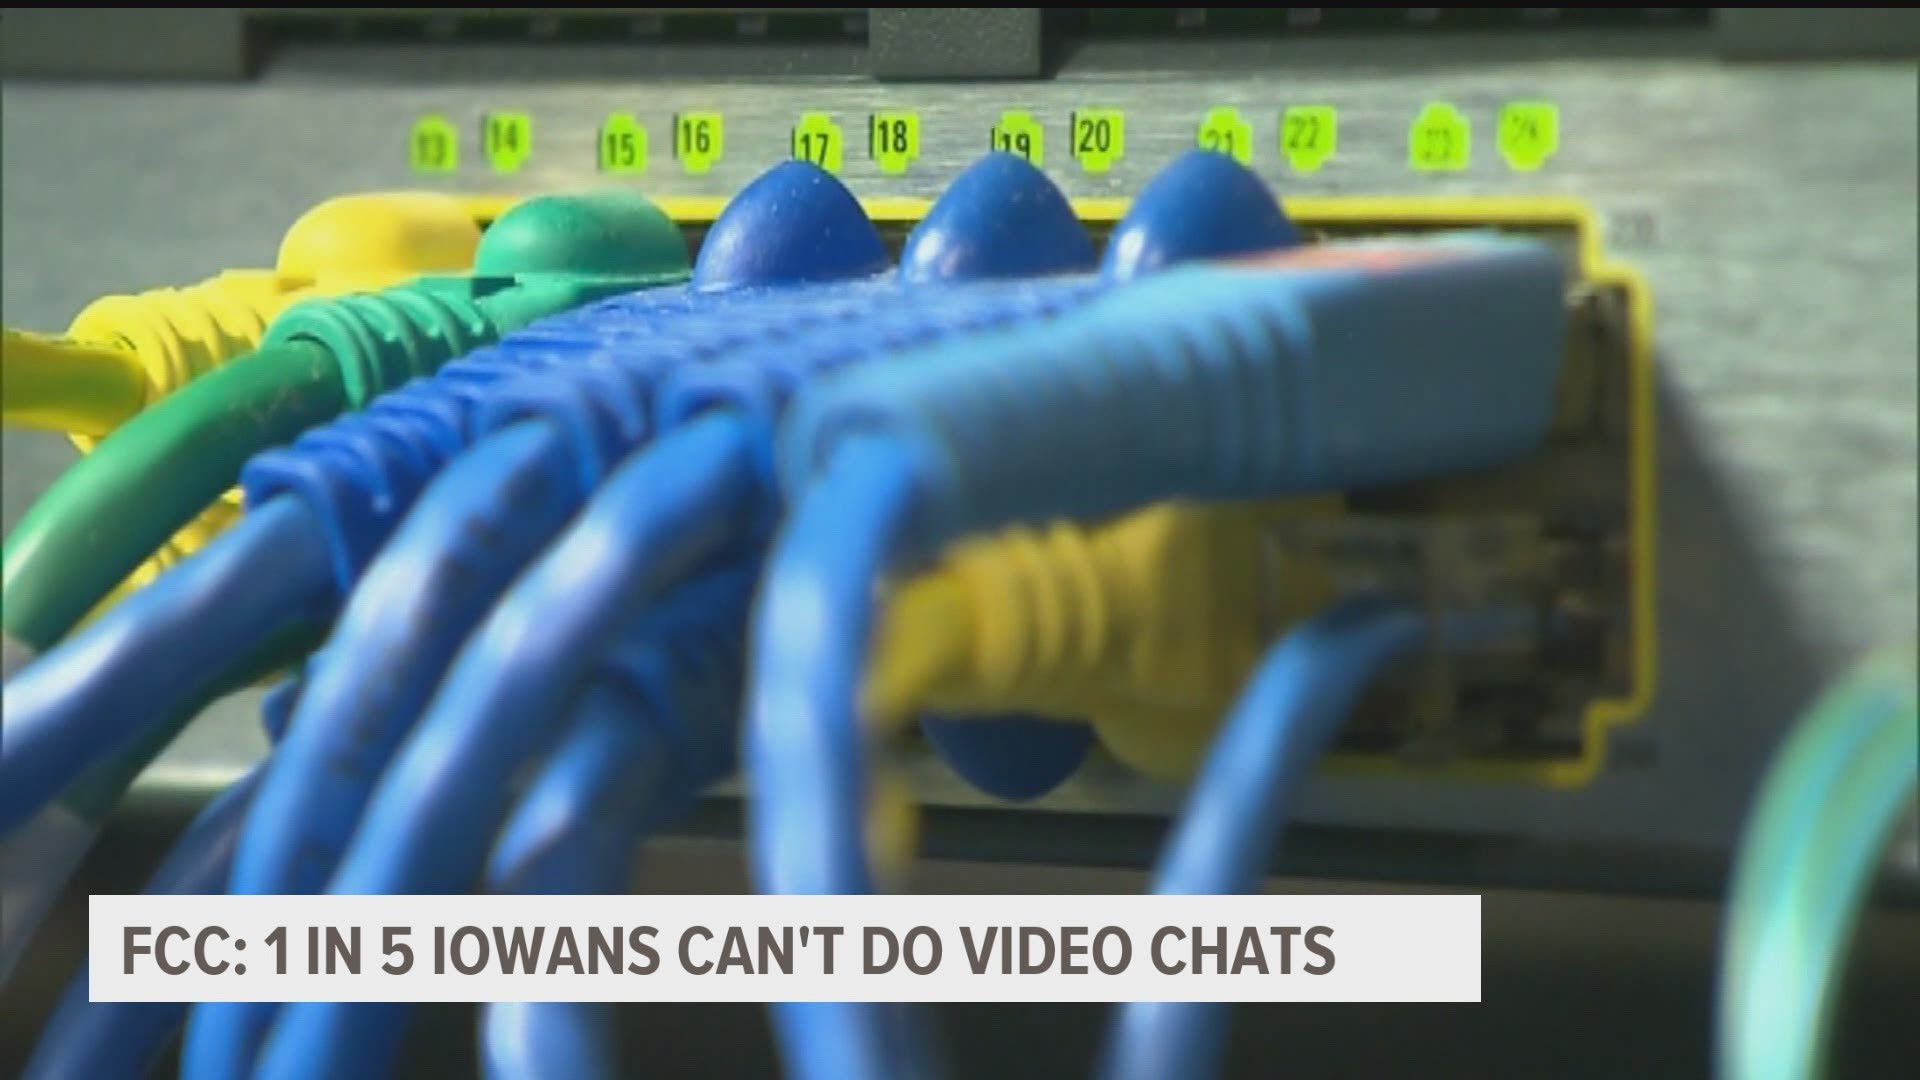 Governor Kim Reynolds is pushing for broadband expansion with hopes of laying infrastructure to all parts of the state by 2025.